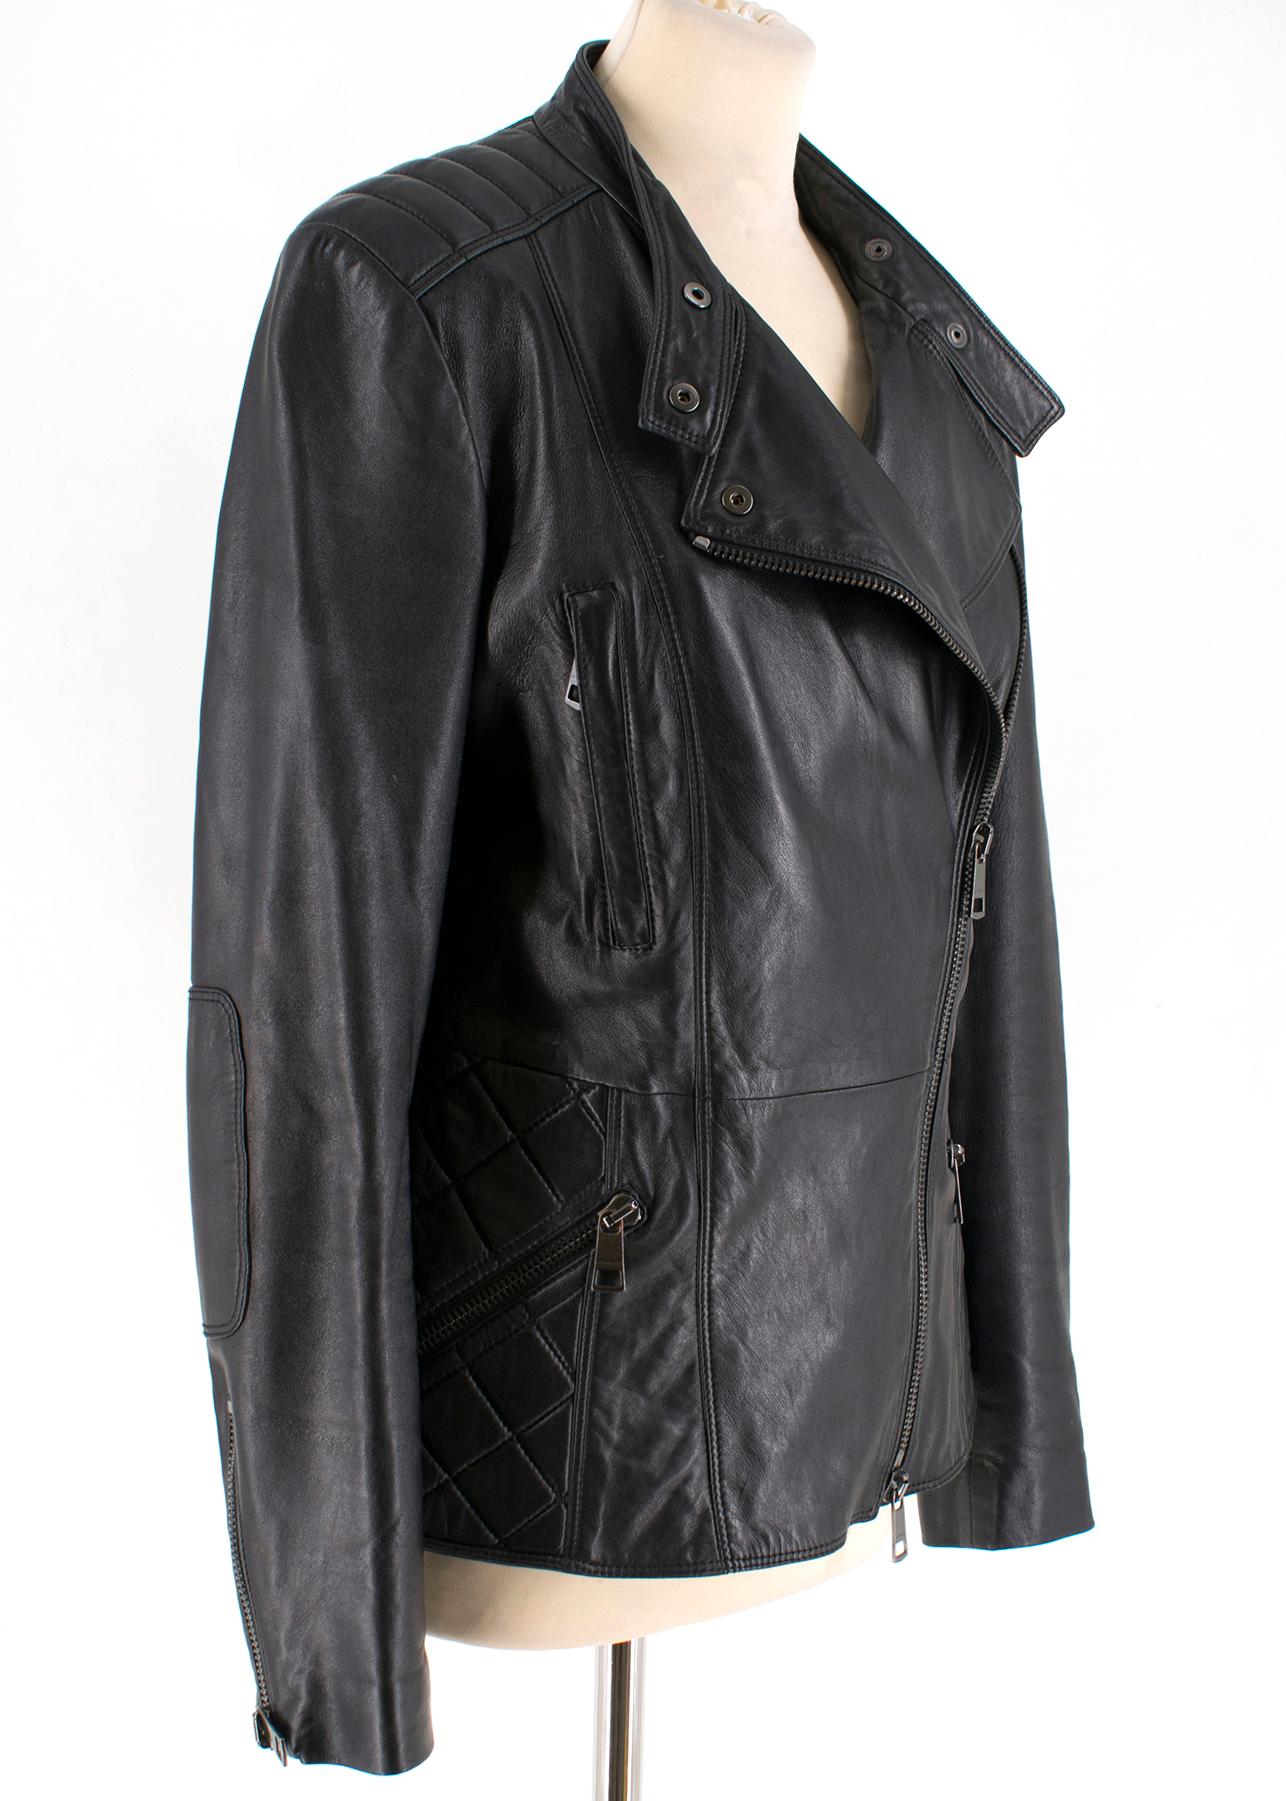 Burberry Asymmetric Zip Black Leather Biker Jacket 

Smooth lambskin leather jacket,
Left centre front zip fastening,
Long sleeves,
Zip up cuffs,
Panel design along shoulders,
Two front chest pockets, 
Snap button collar closure,
Interior features